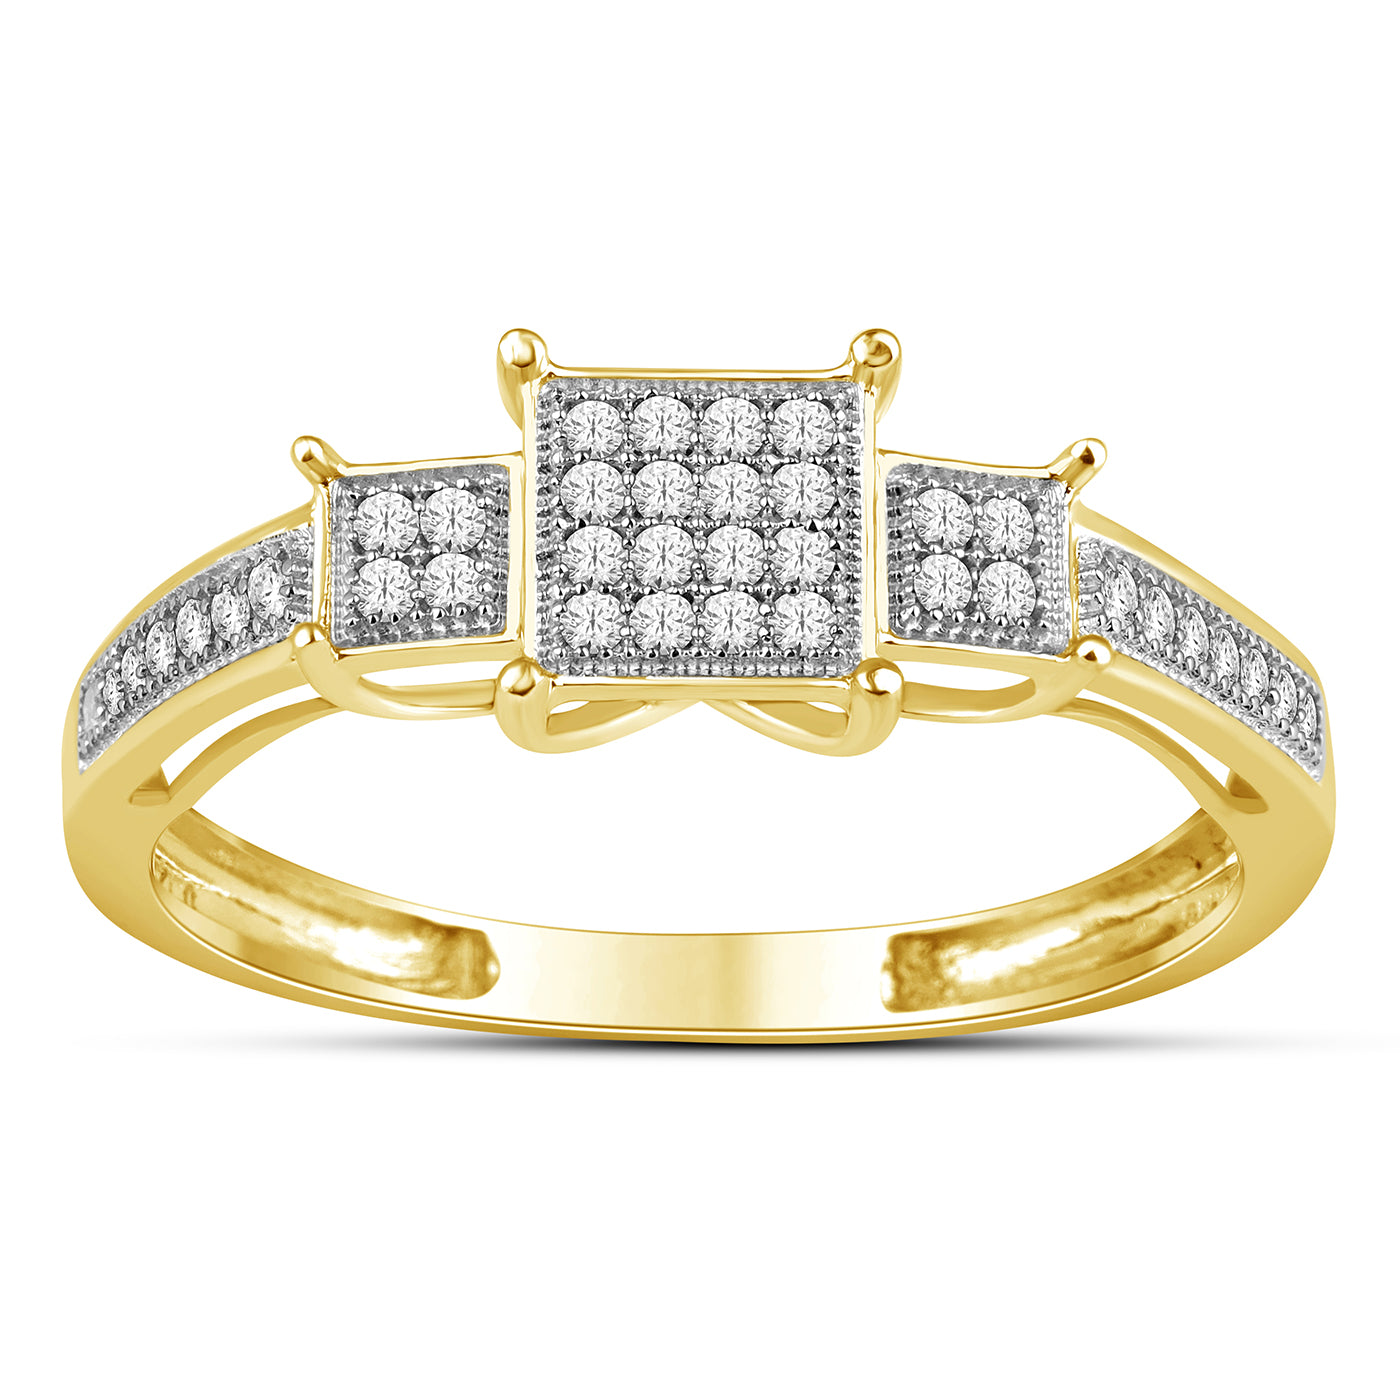 Micro Pave Engagement Ring With 0.12 Carat TW Of Diamonds In 10K Yellow Gold